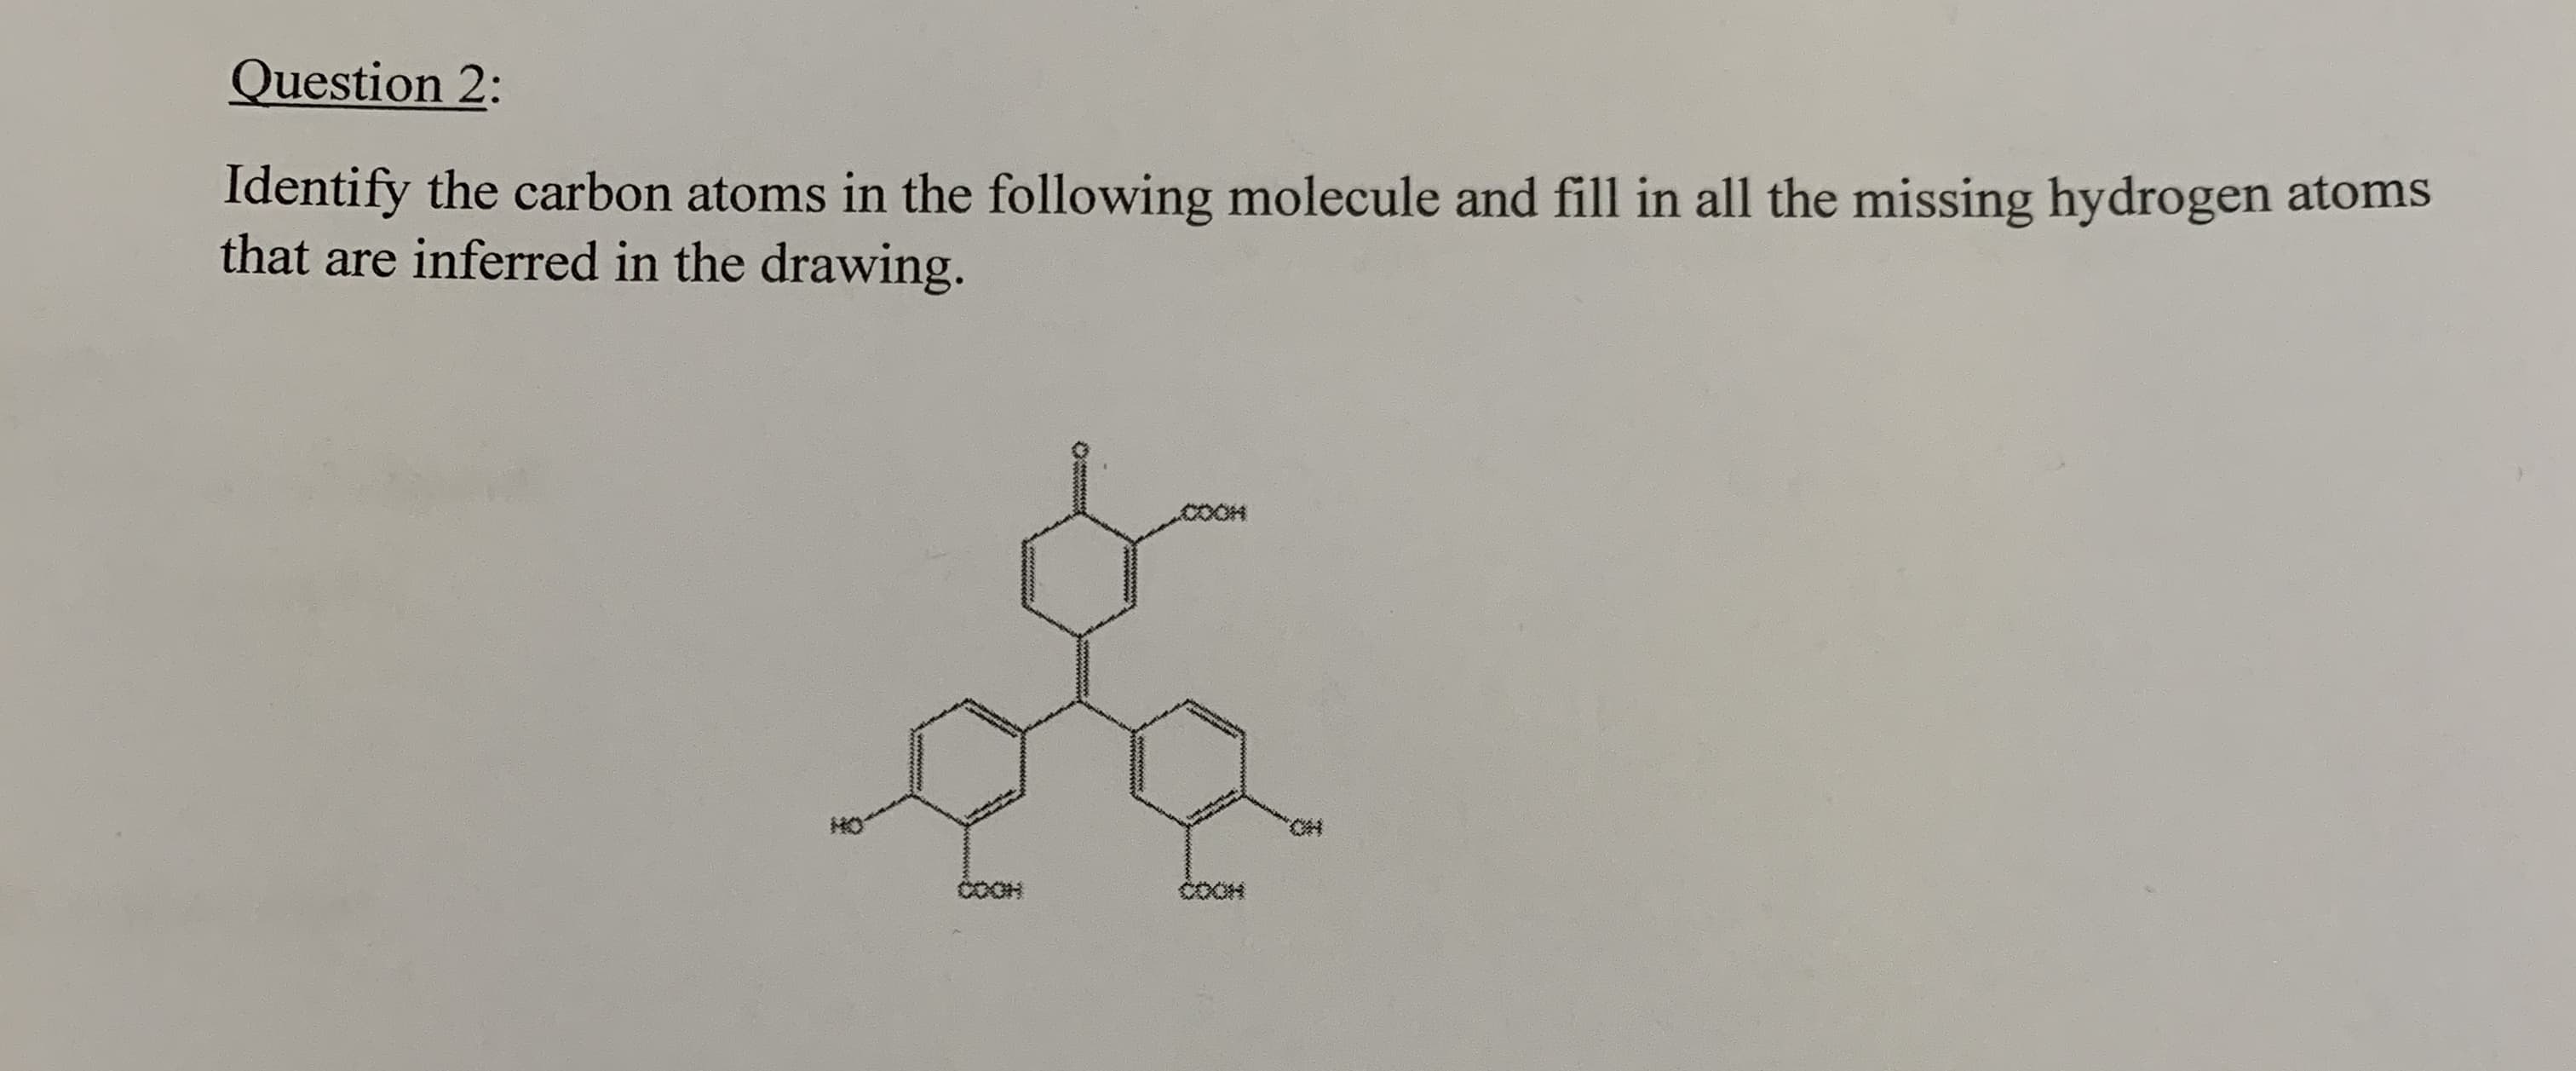 Identify the carbon atoms in the following molecule and fill in all the missing hydrogen atoms
that are inferred in the drawing.
COOH
HO.
HO
COOH
COOH
